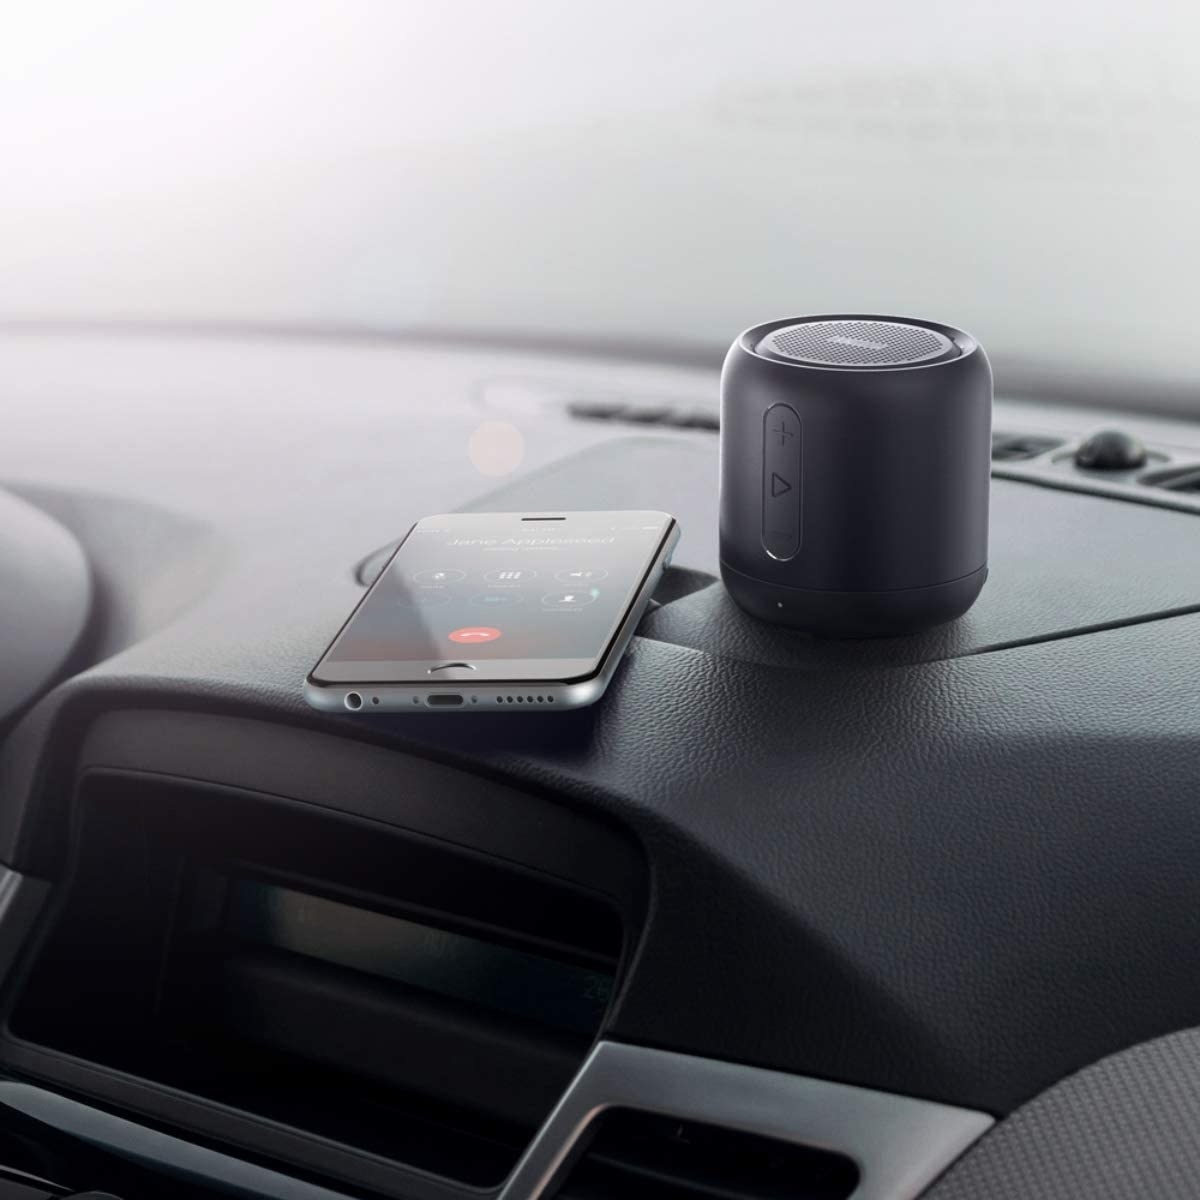 A Bluetooth speaker sitting on a car dashboard next to a phone